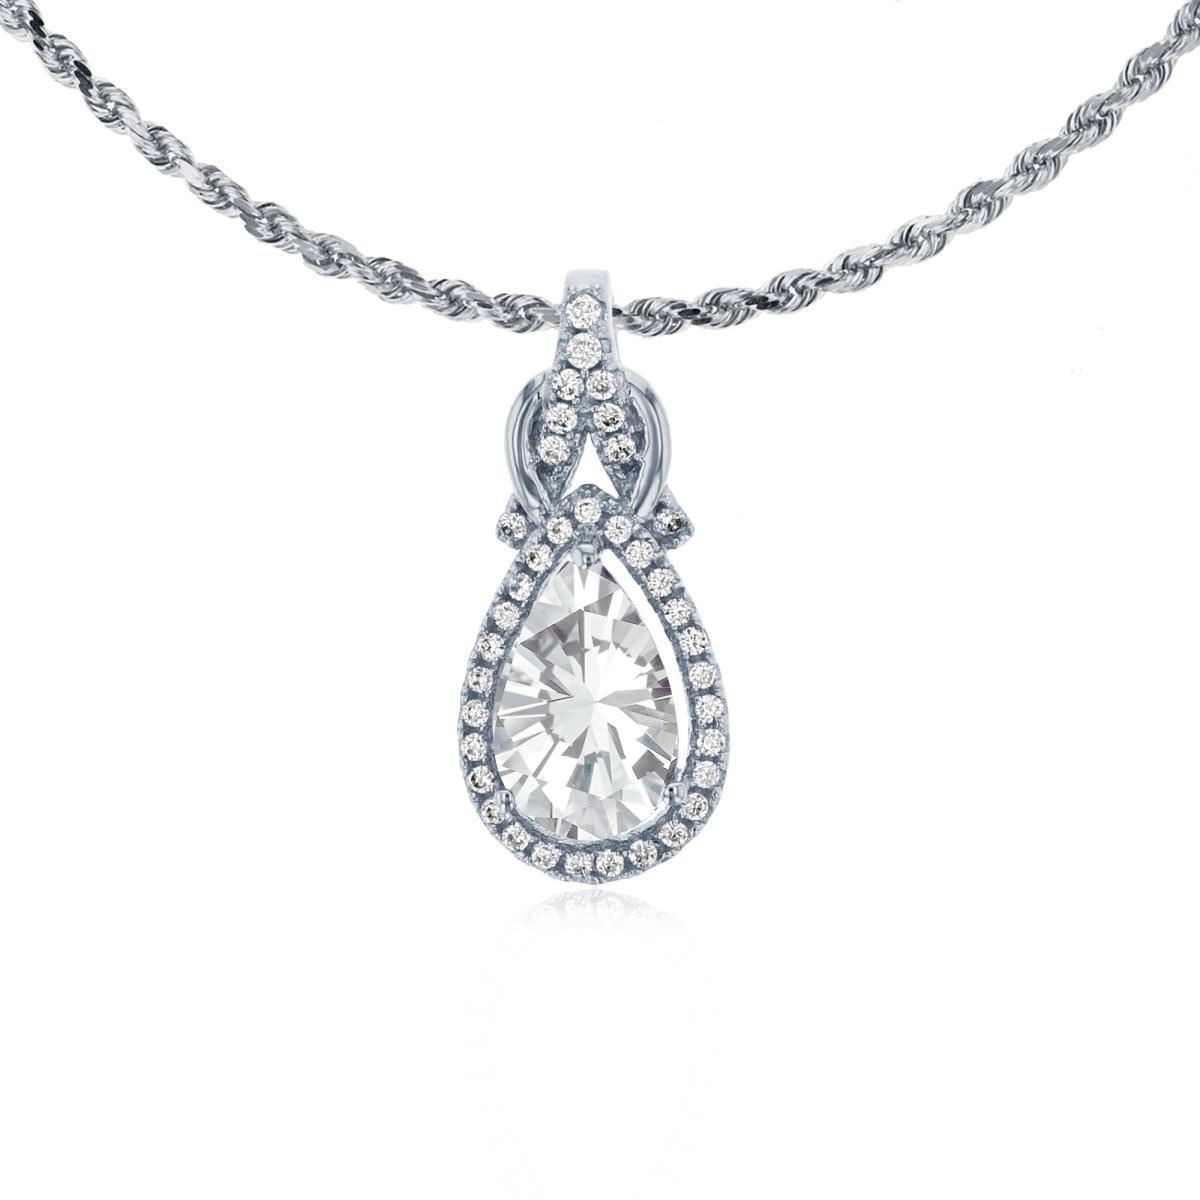 10K White Gold 8x5mm Pear Cut White Topaz & 0.11 CTTW Rnd Diamond Knot 18" Rope Chain Necklace